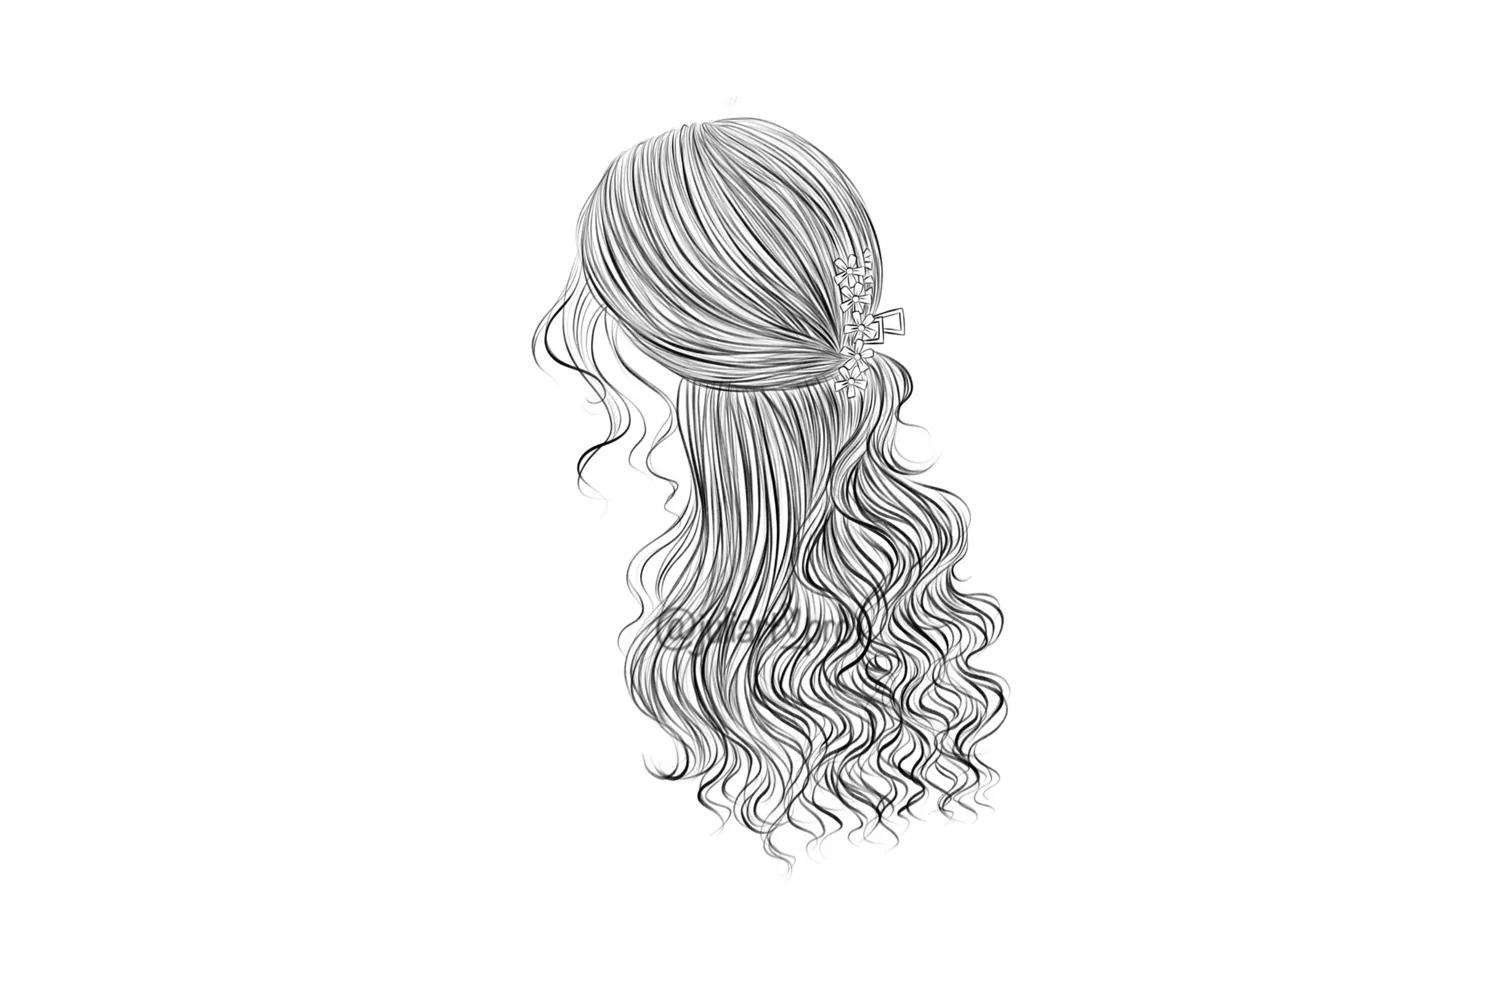 Drawing of a woman's head with long hair.